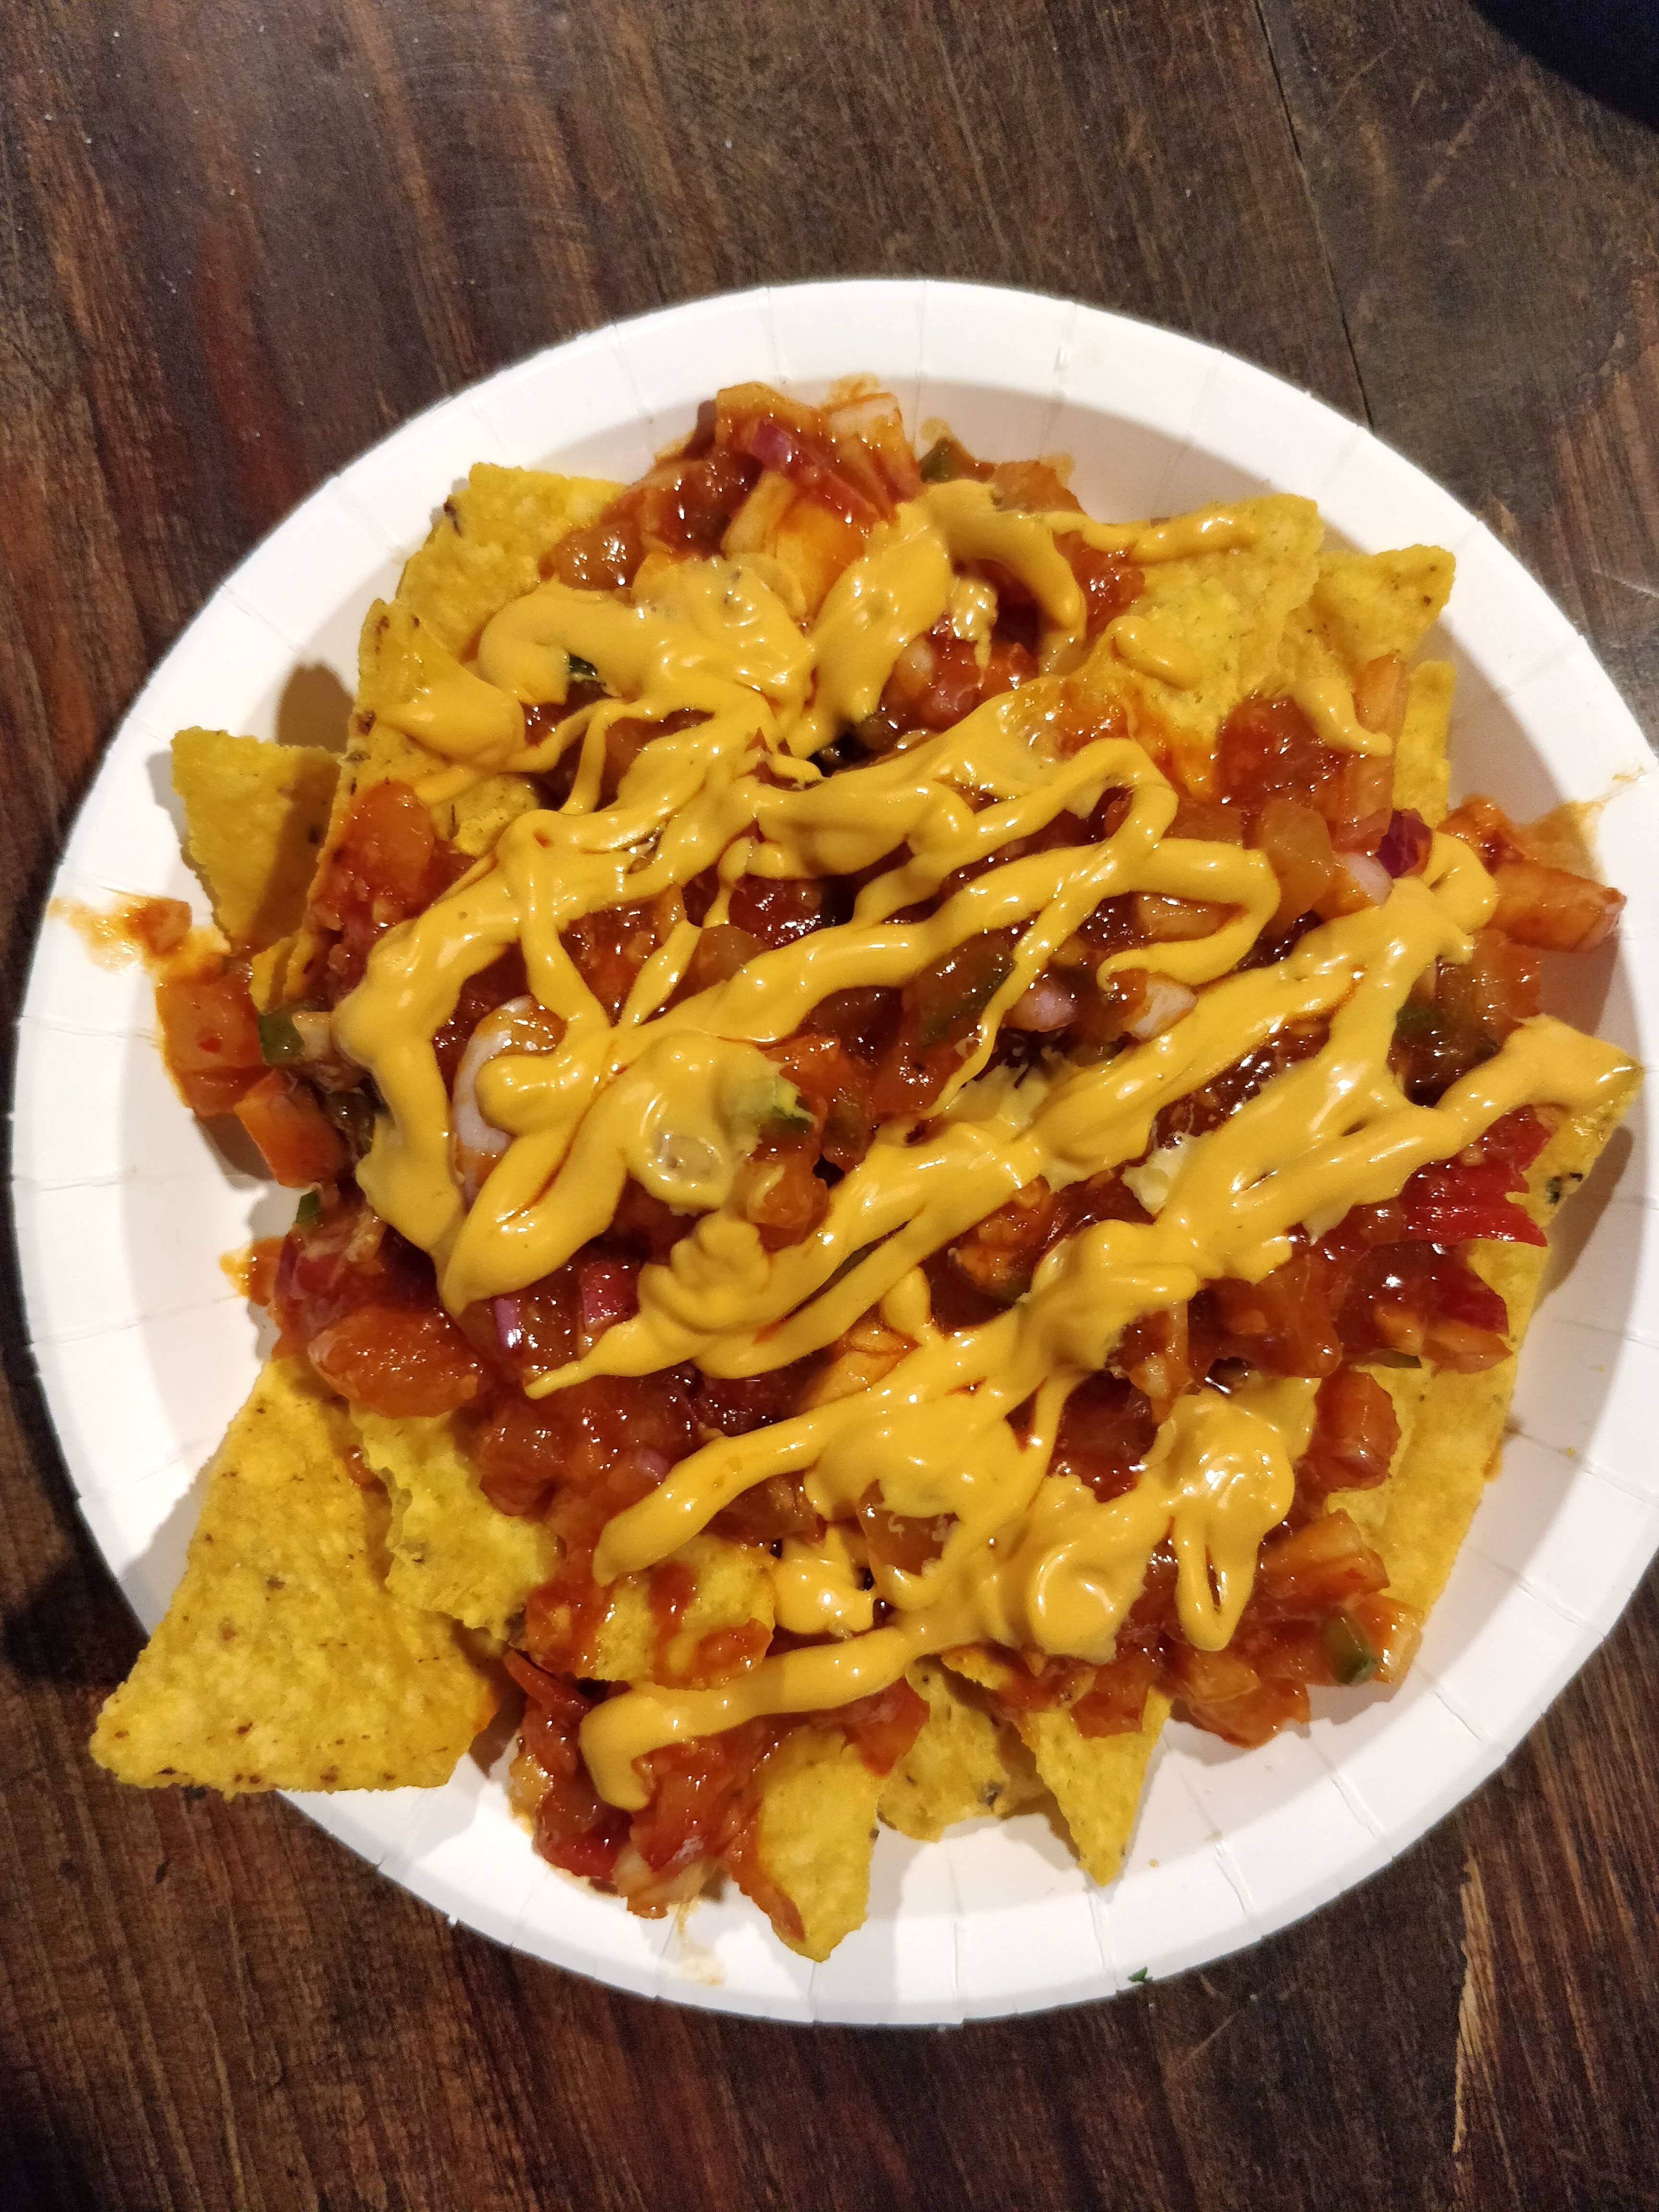 Dish,Food,Cuisine,Ingredient,Nachos,Frito pie,Junk food,Produce,Cheese fries,Meat